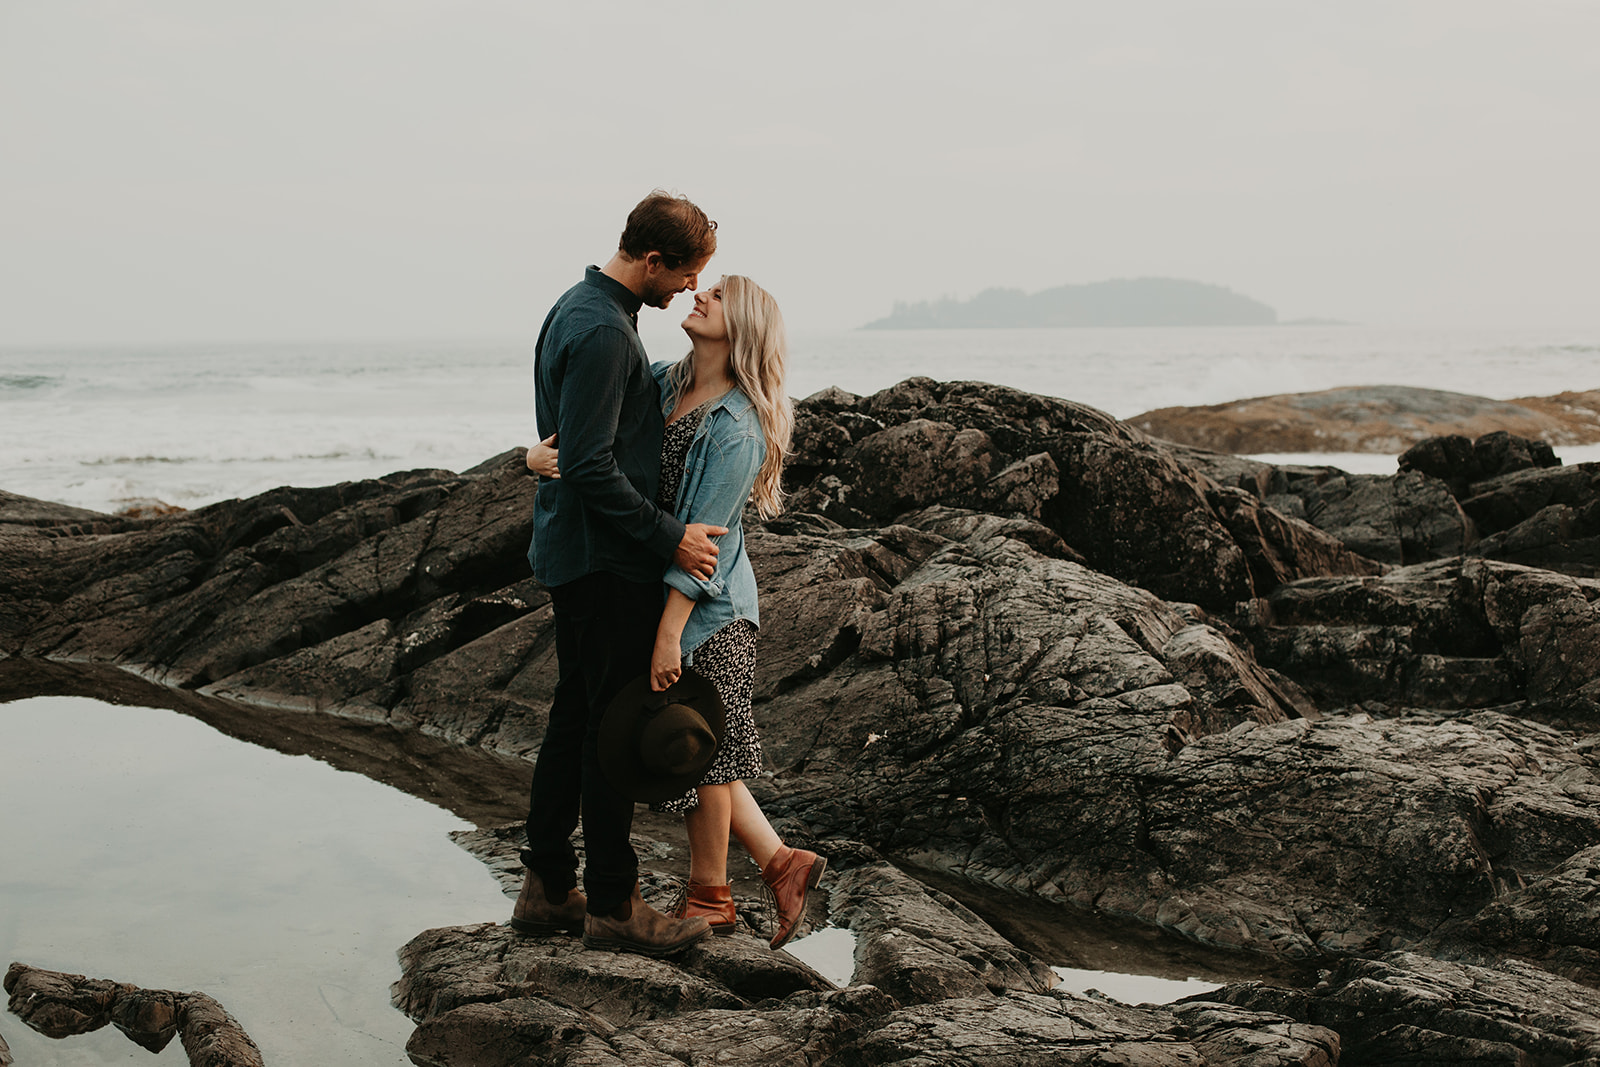 6 Tips All About Choosing Outfits For Your Engagement Session - Courtney Jess featured on Bronte Bride